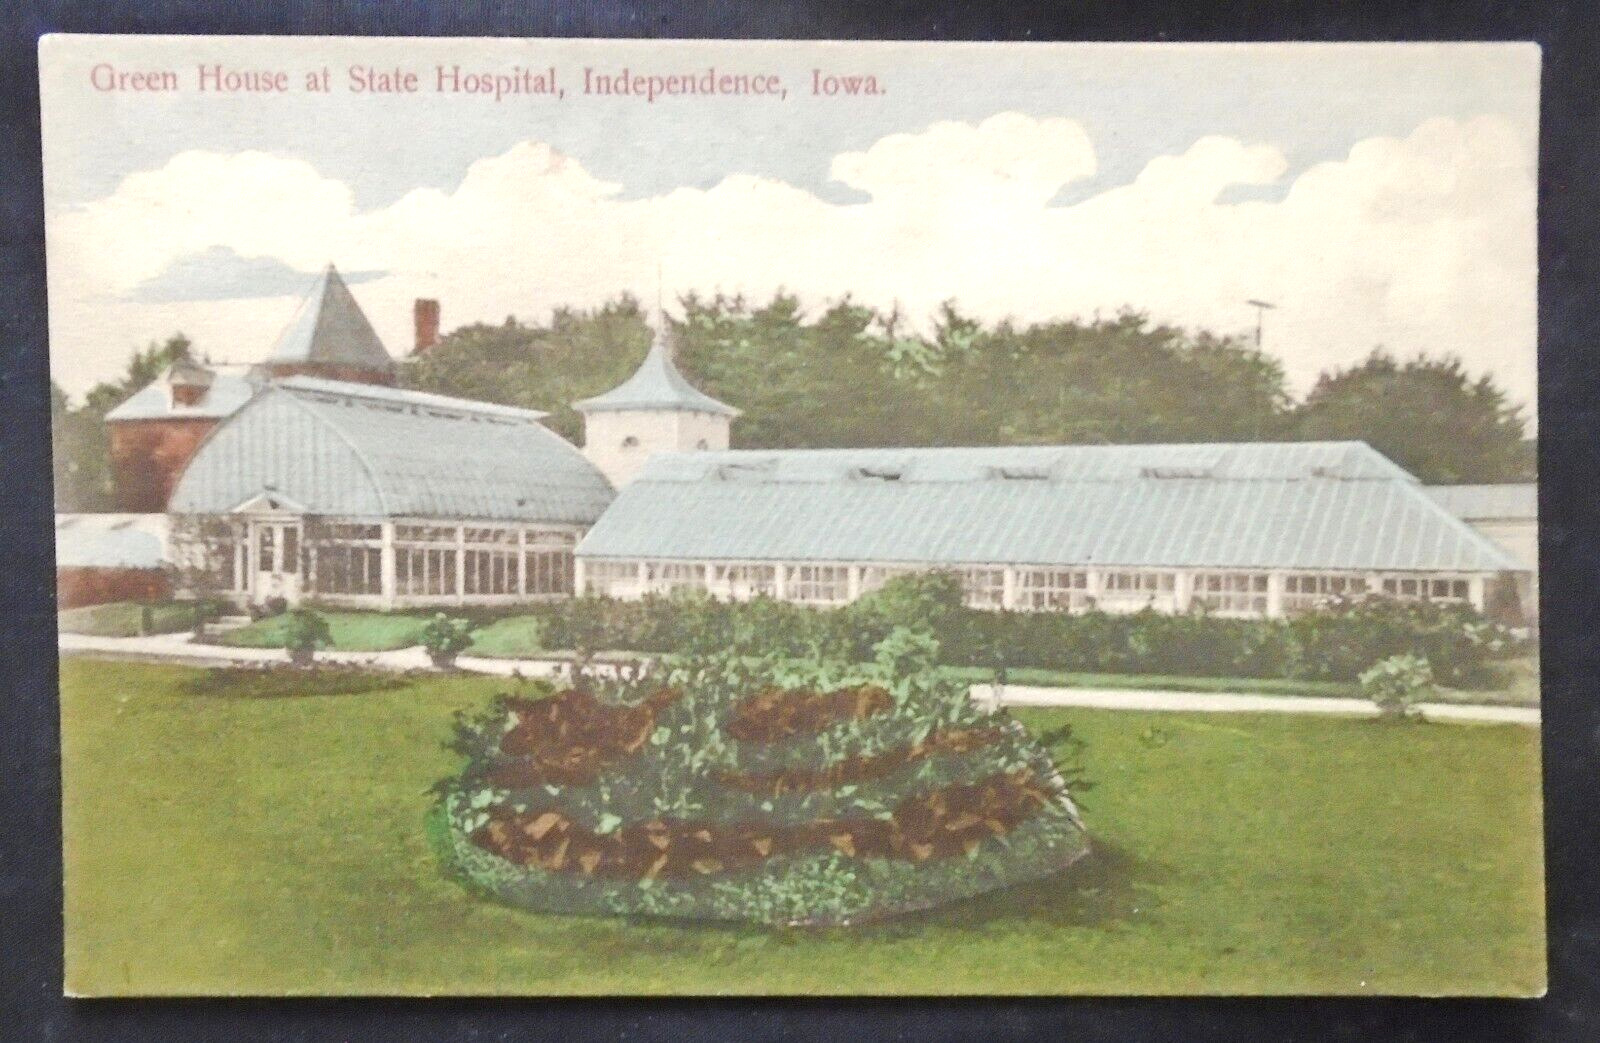 Independence, IA, Green House at State Hospital, circa 1910